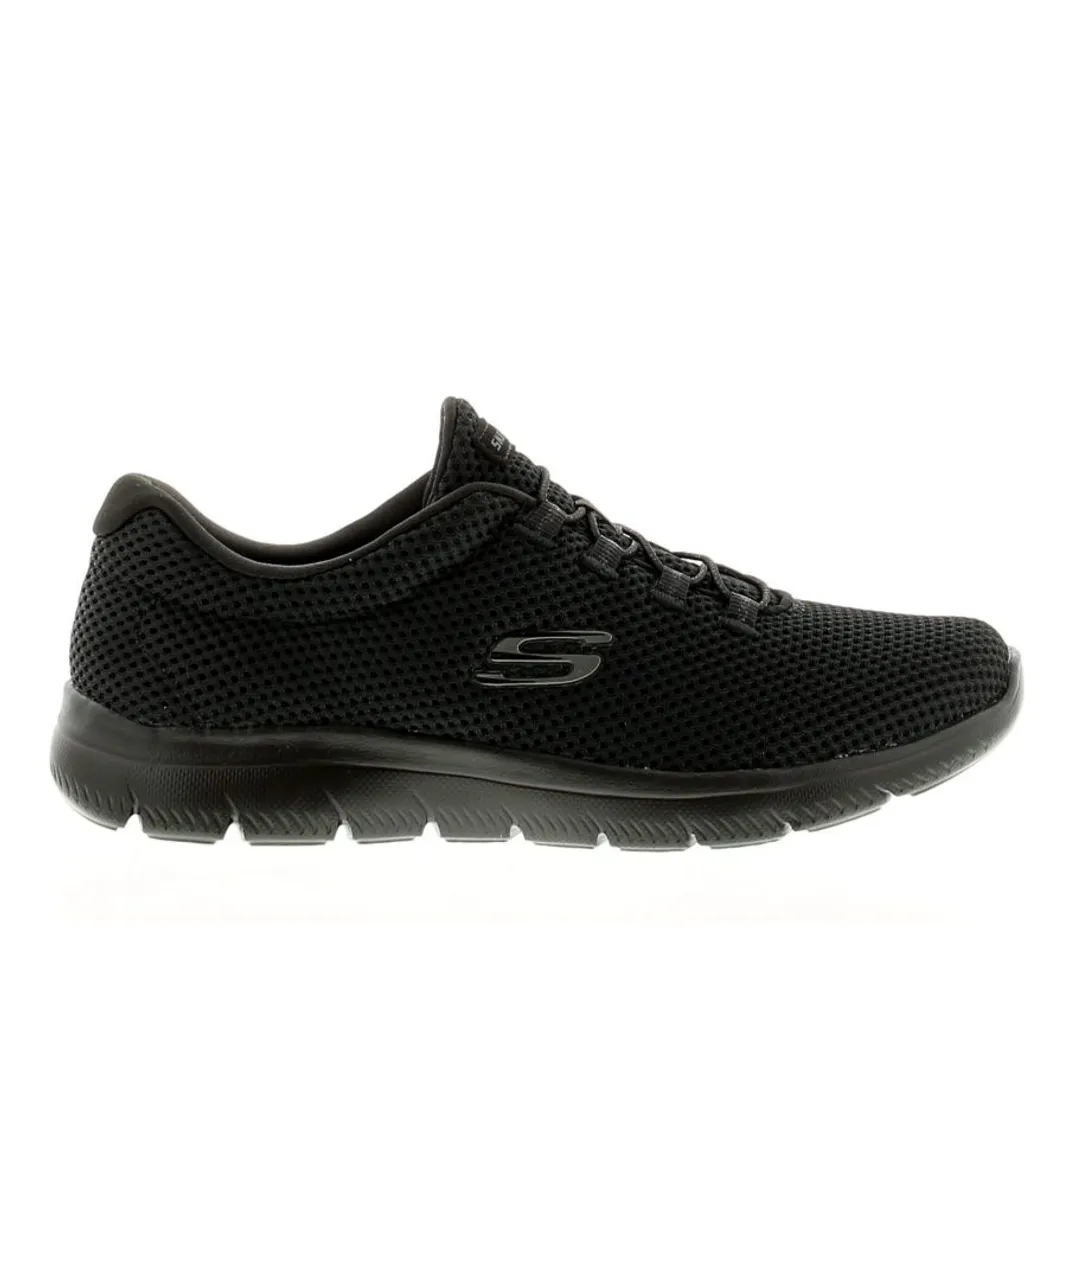 Skechers Womens Trainers summits Lace Up black Textile